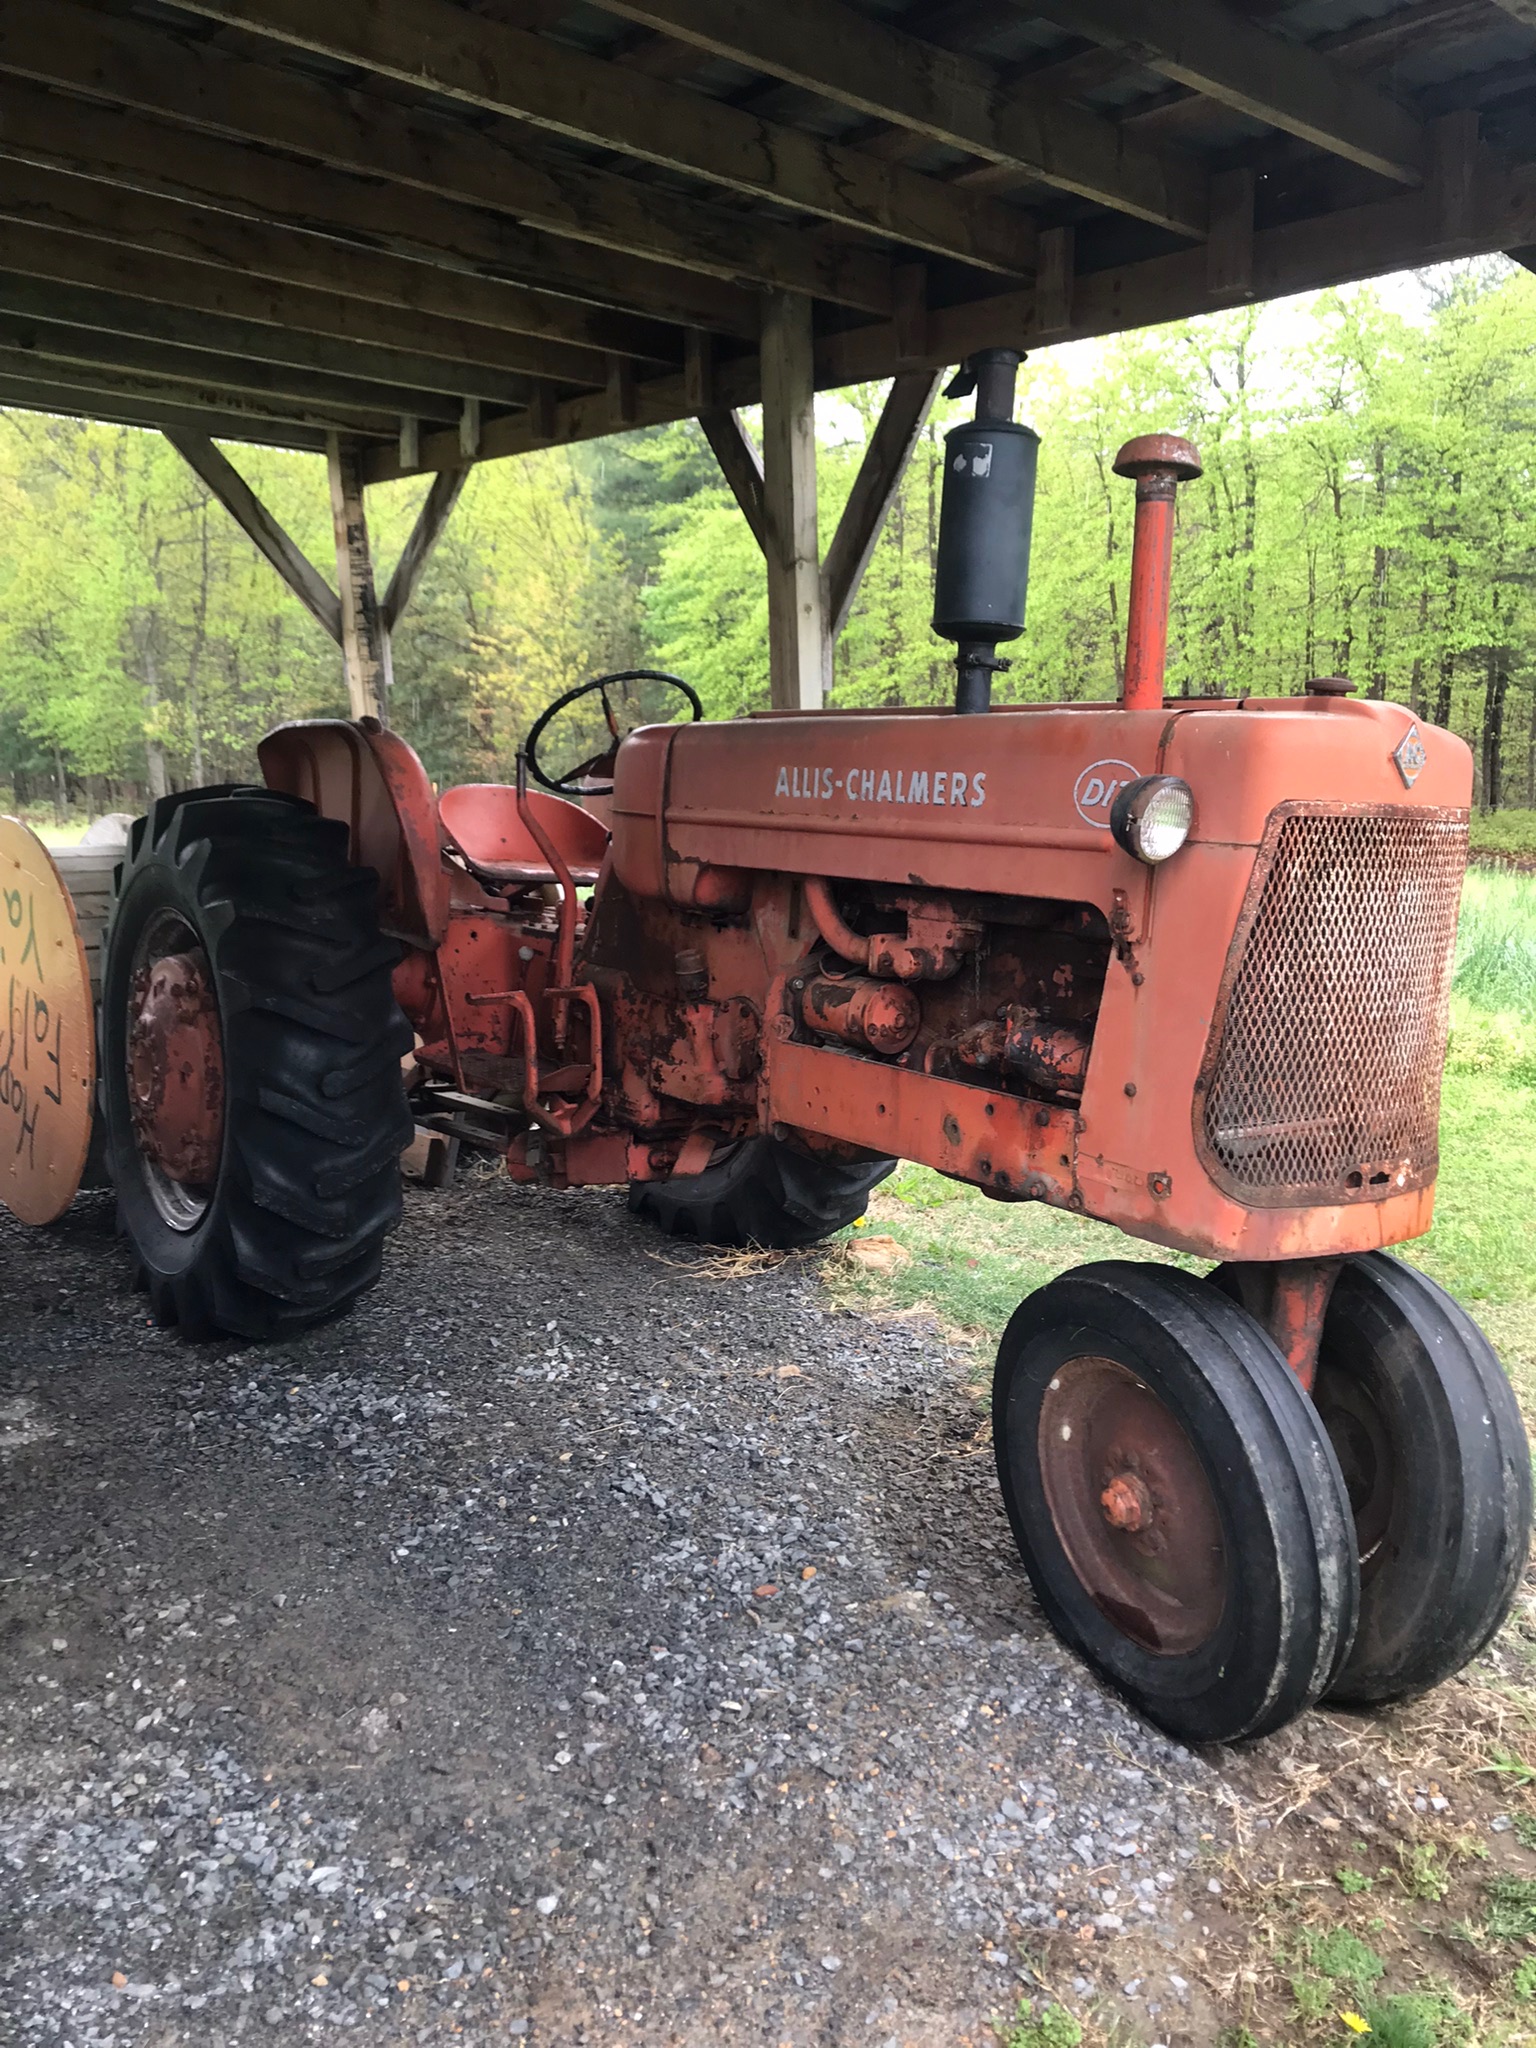 Starting repairs on the Allis Chalmers D17. Tear down day